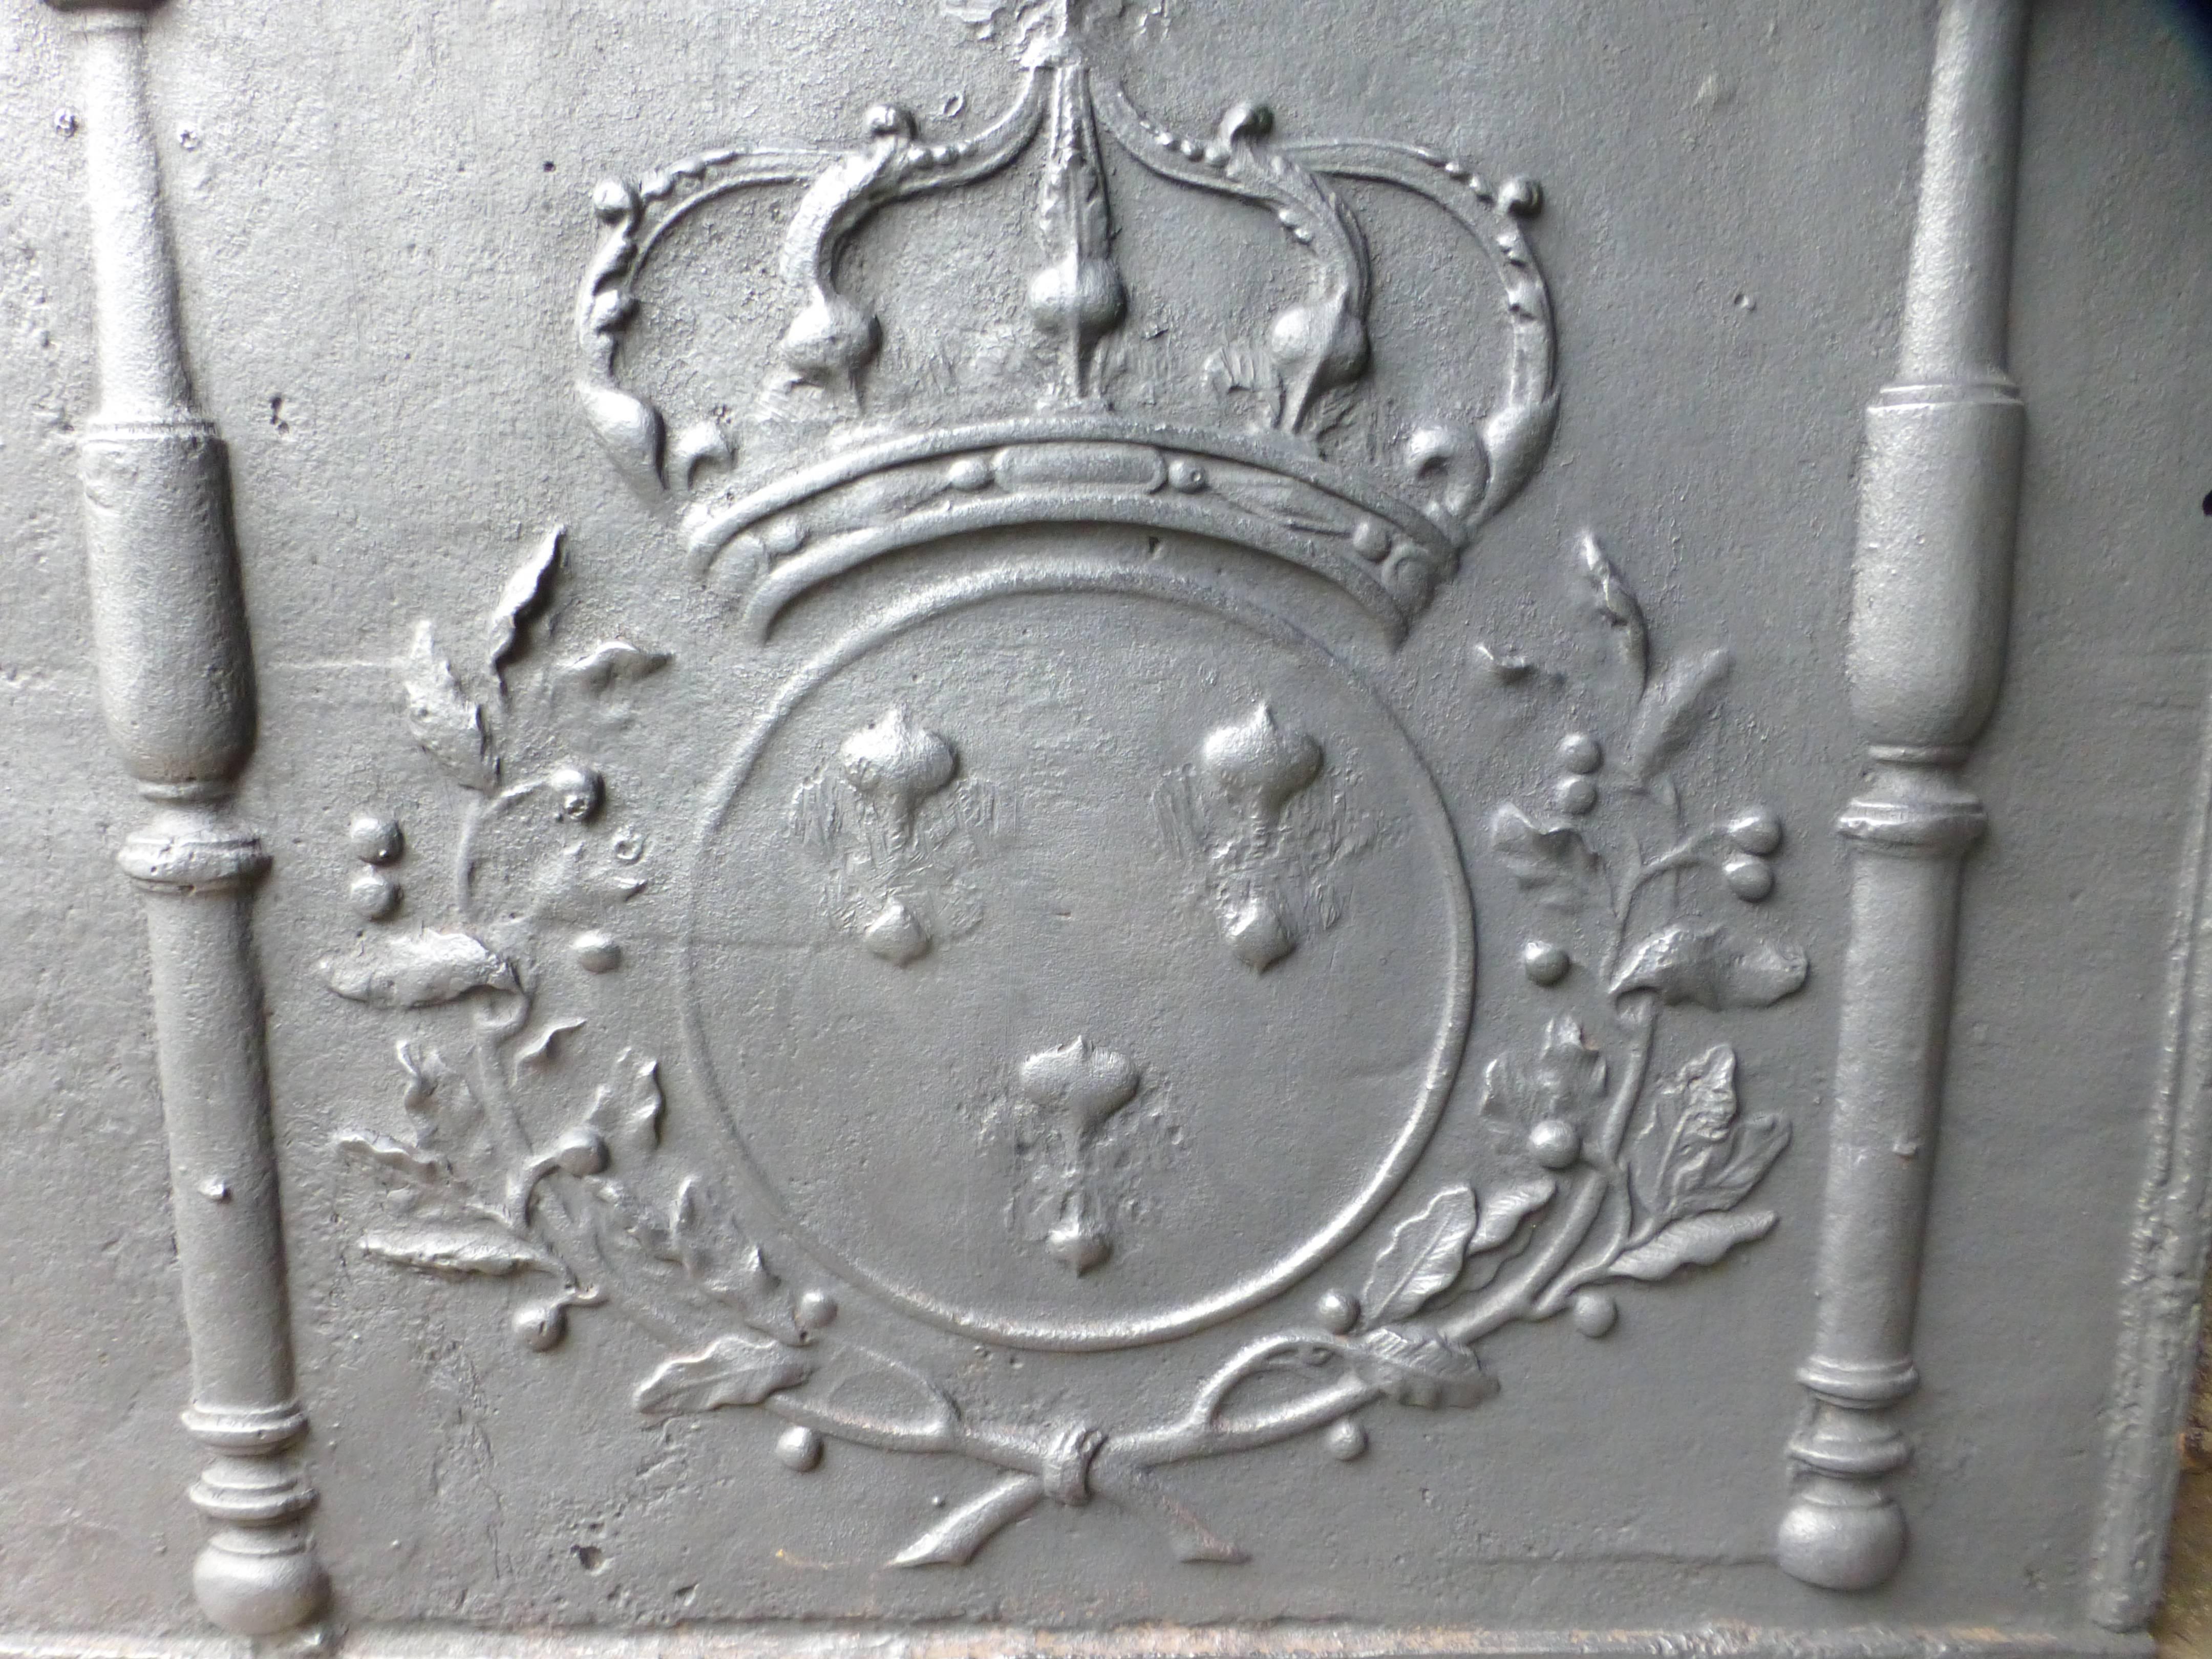 18th century French fireback with arms of France and date 1744. The arms of France are partly truncated during the French Revolution so that it wouldn't show any feudal or royal symbols anymore.

We have a unique and specialized collection of